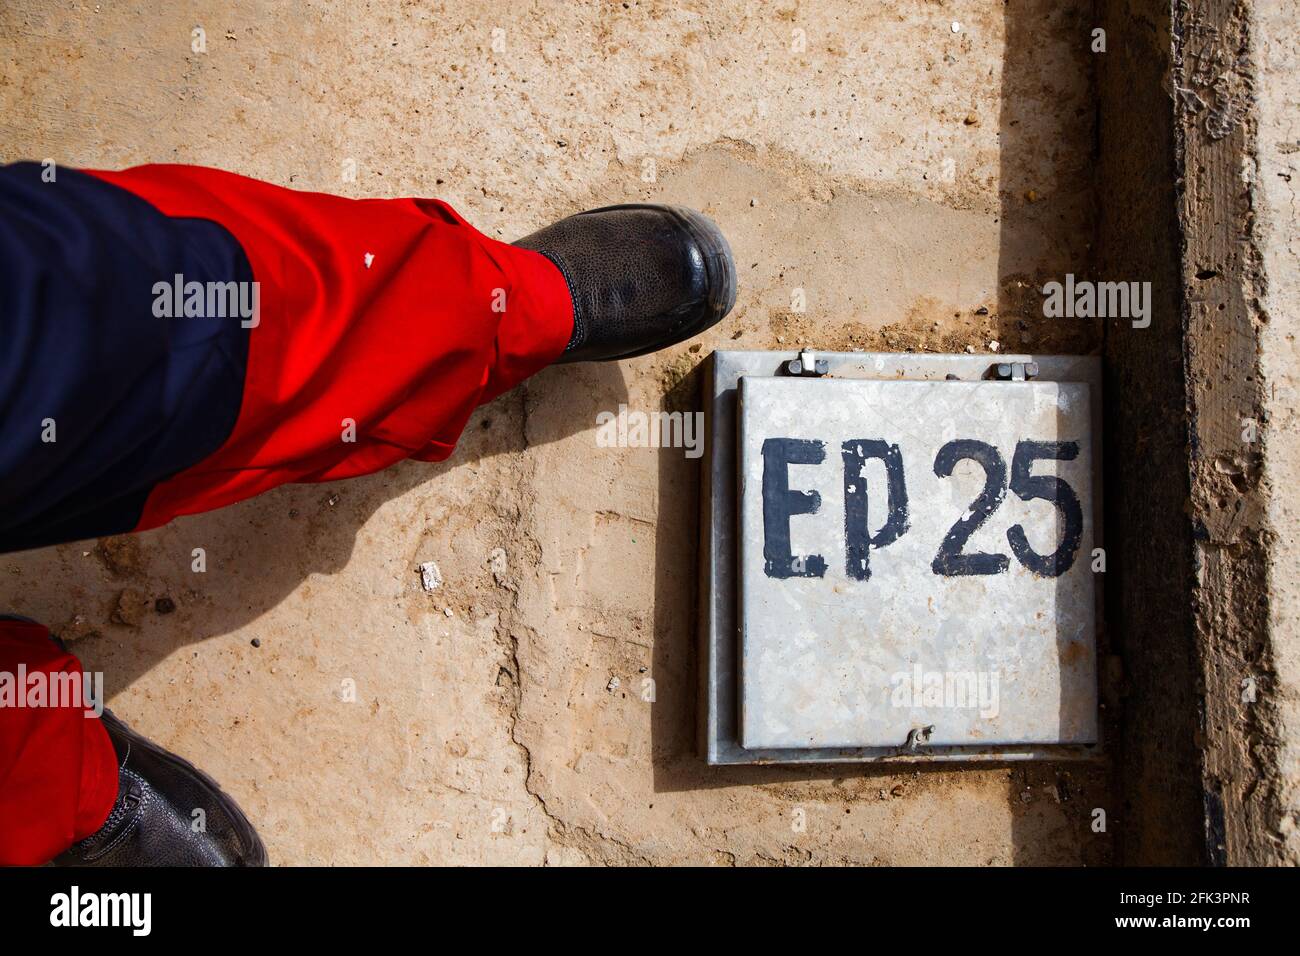 Oil refinery. Worker's legs and boots near manhole on concrete floor. Hand-man sign EP-25. Abstract industrial photo. Stock Photo